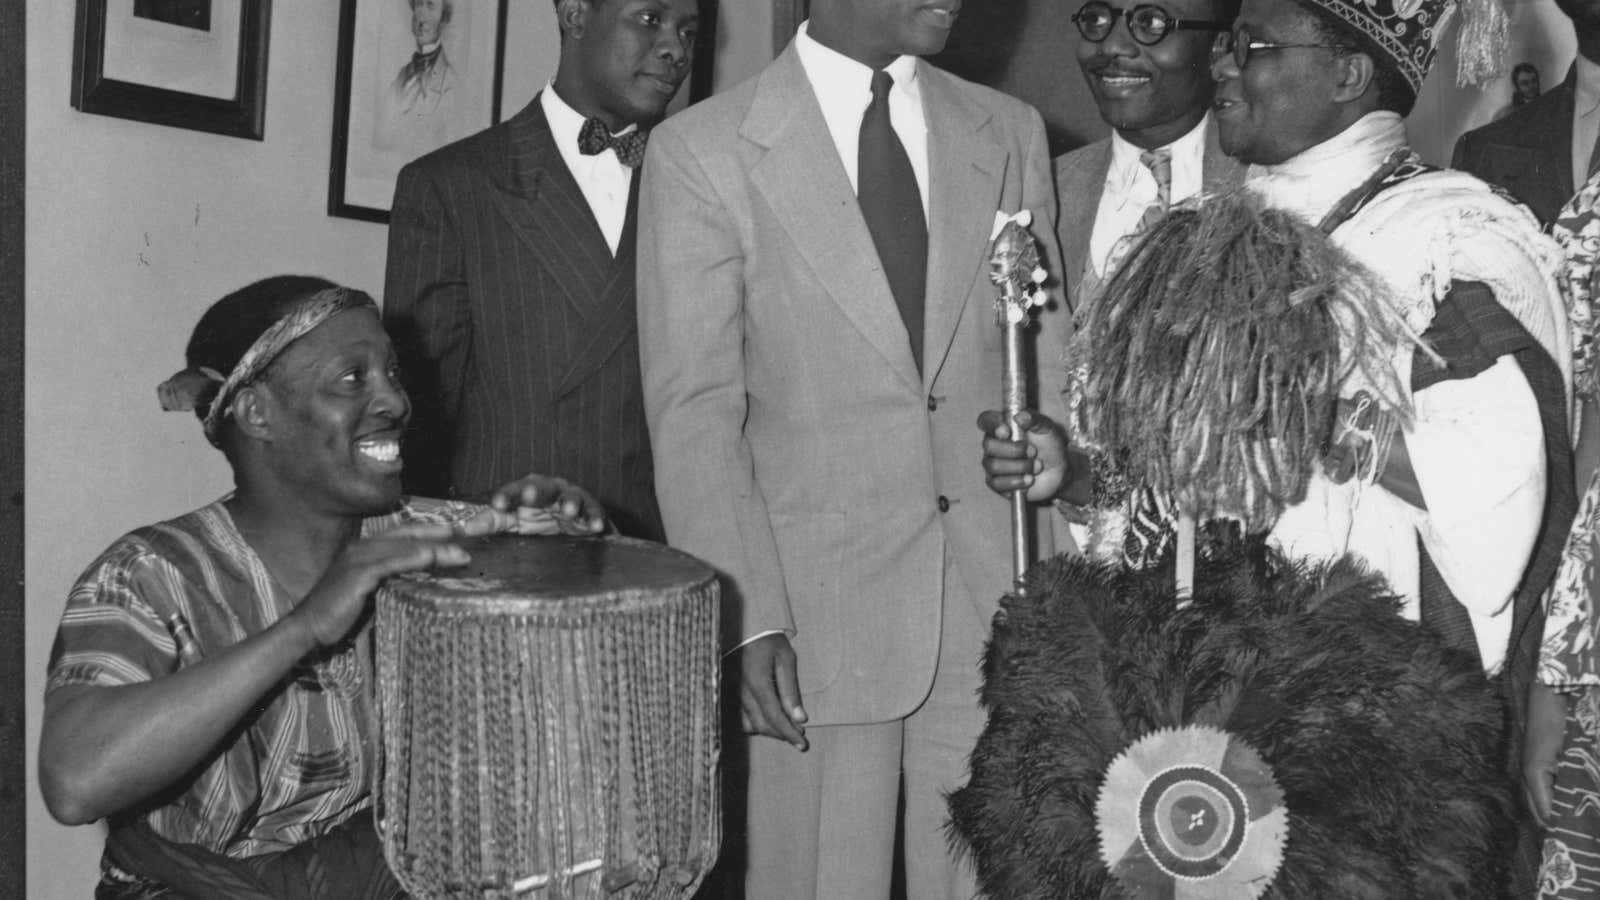 Ghana’s Kwame Nkrumah is greeted by drummer Alf Payne (left) and Nigerian activist Ladipo Solanke (right) at a meeting of the West African Students Union in London in 1951.